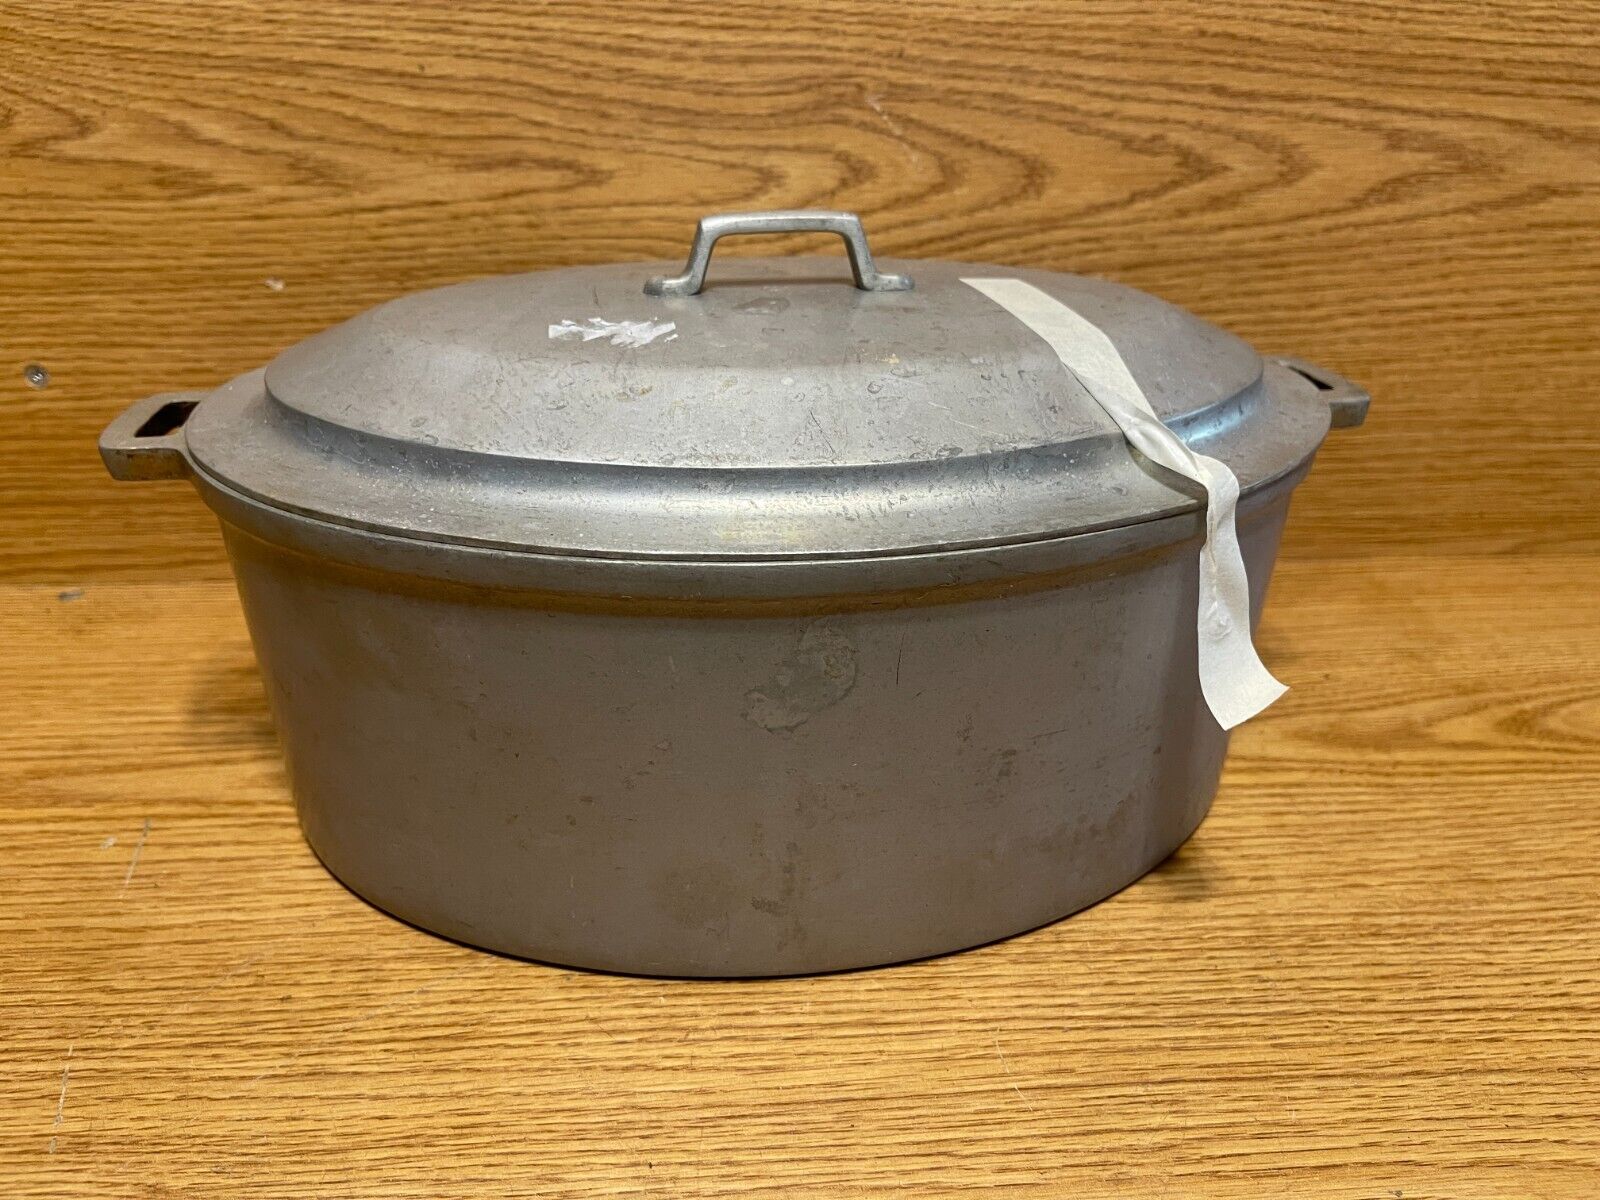 Miracle Maid Cookware G2 Cast Aluminum Roaster Cooking Pot 14 1/2 x 9 1/2